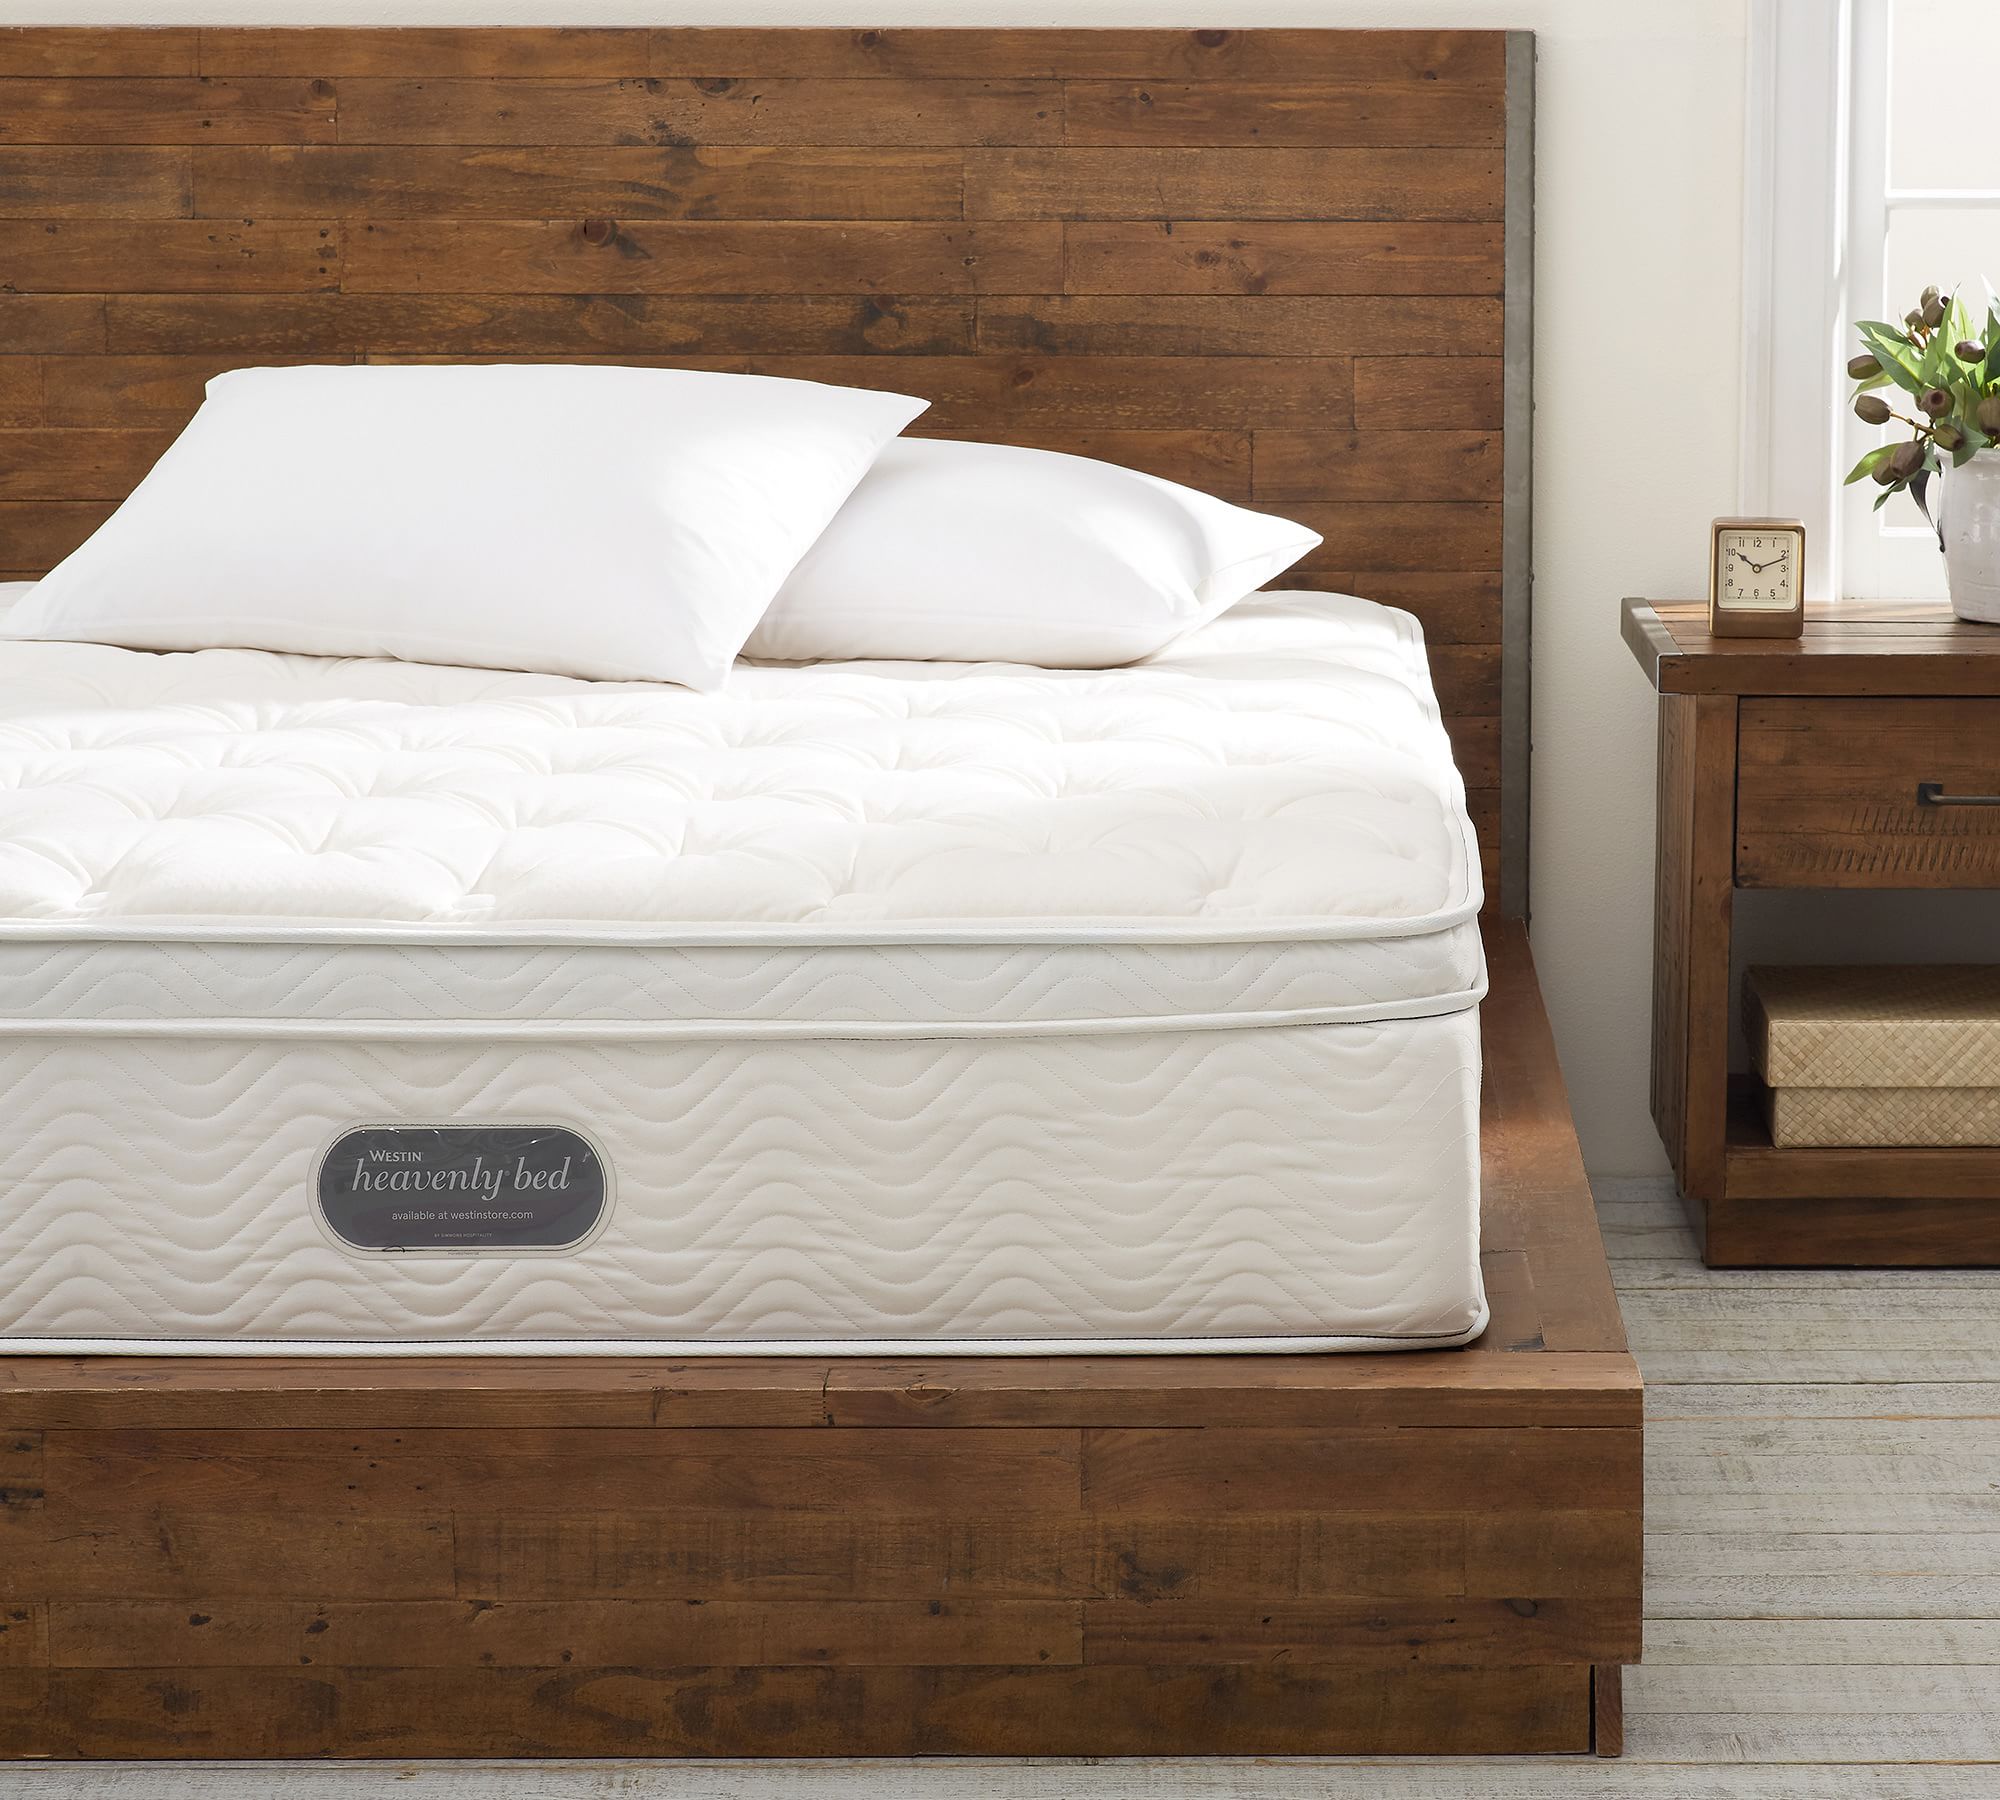 Westin Heavenly® Bed with Pillowtop